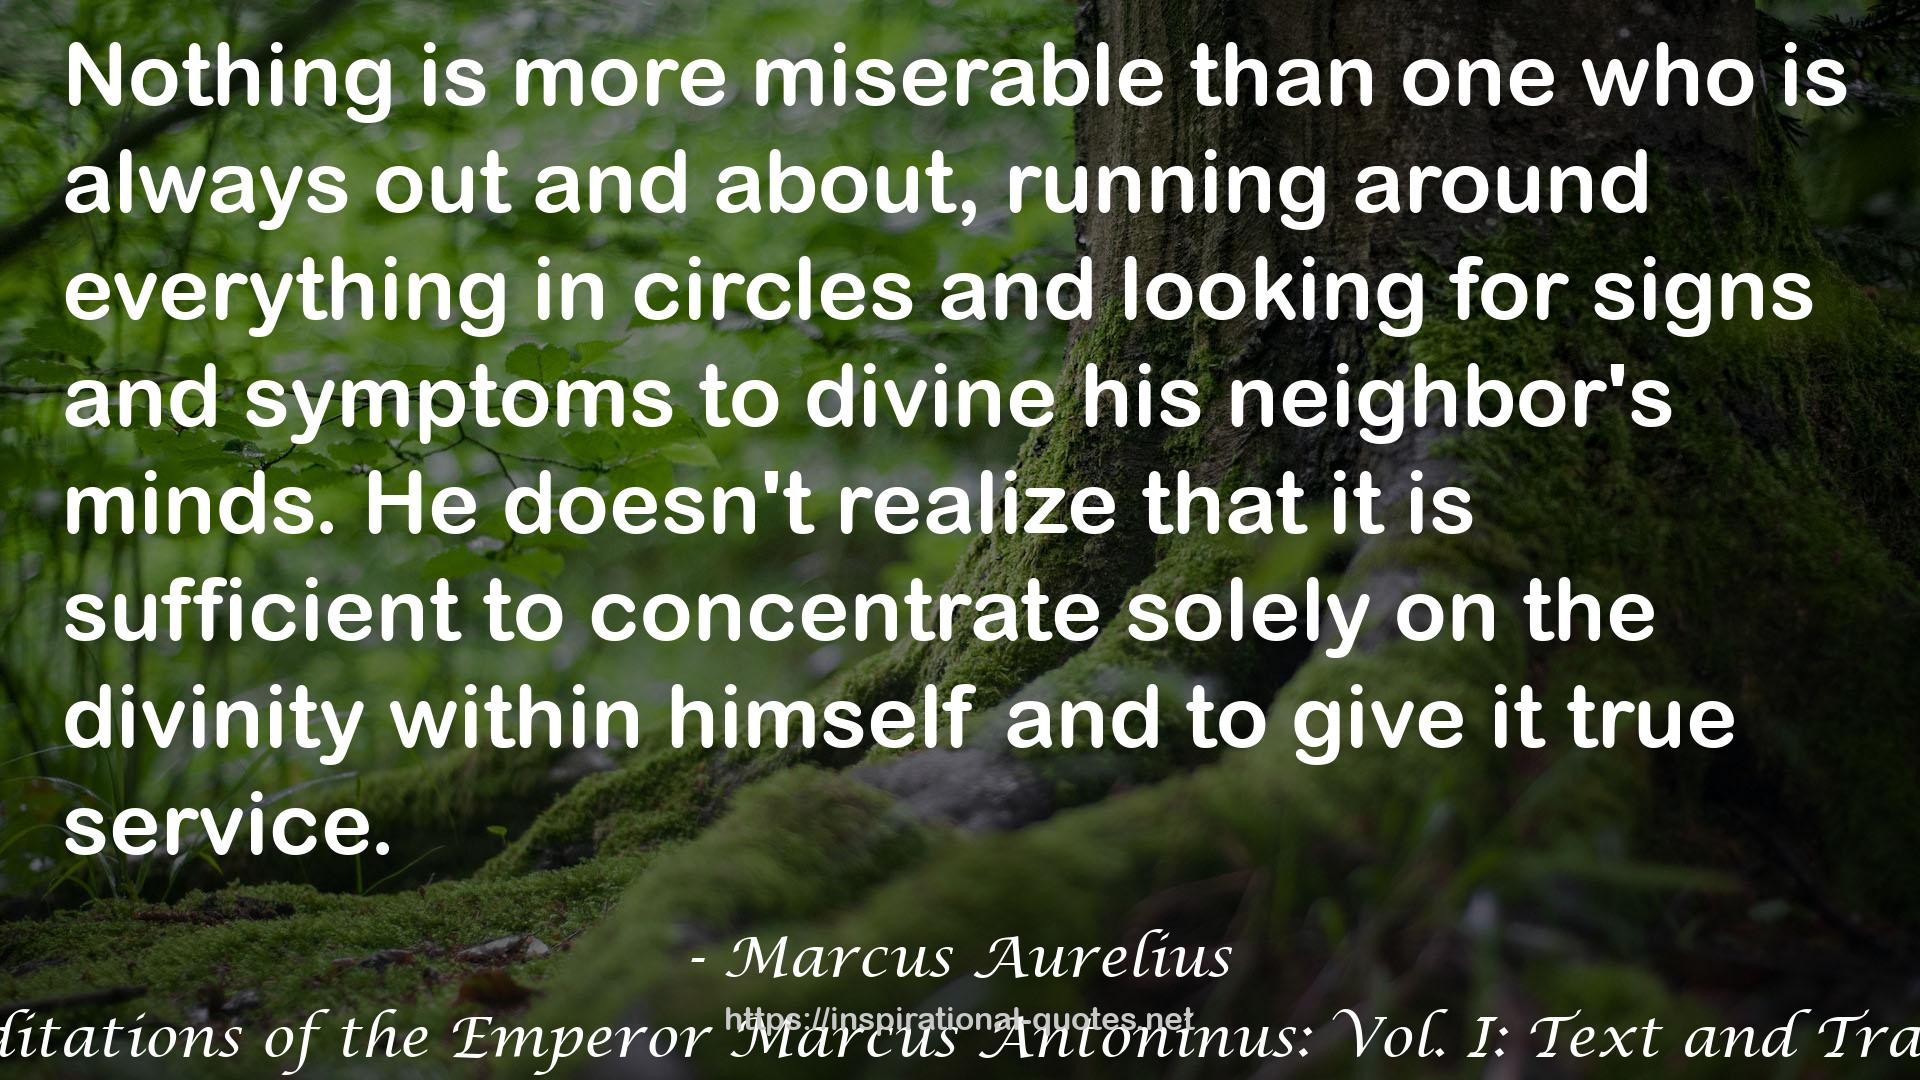 The Meditations of the Emperor Marcus Antoninus: Vol. I: Text and Translation QUOTES